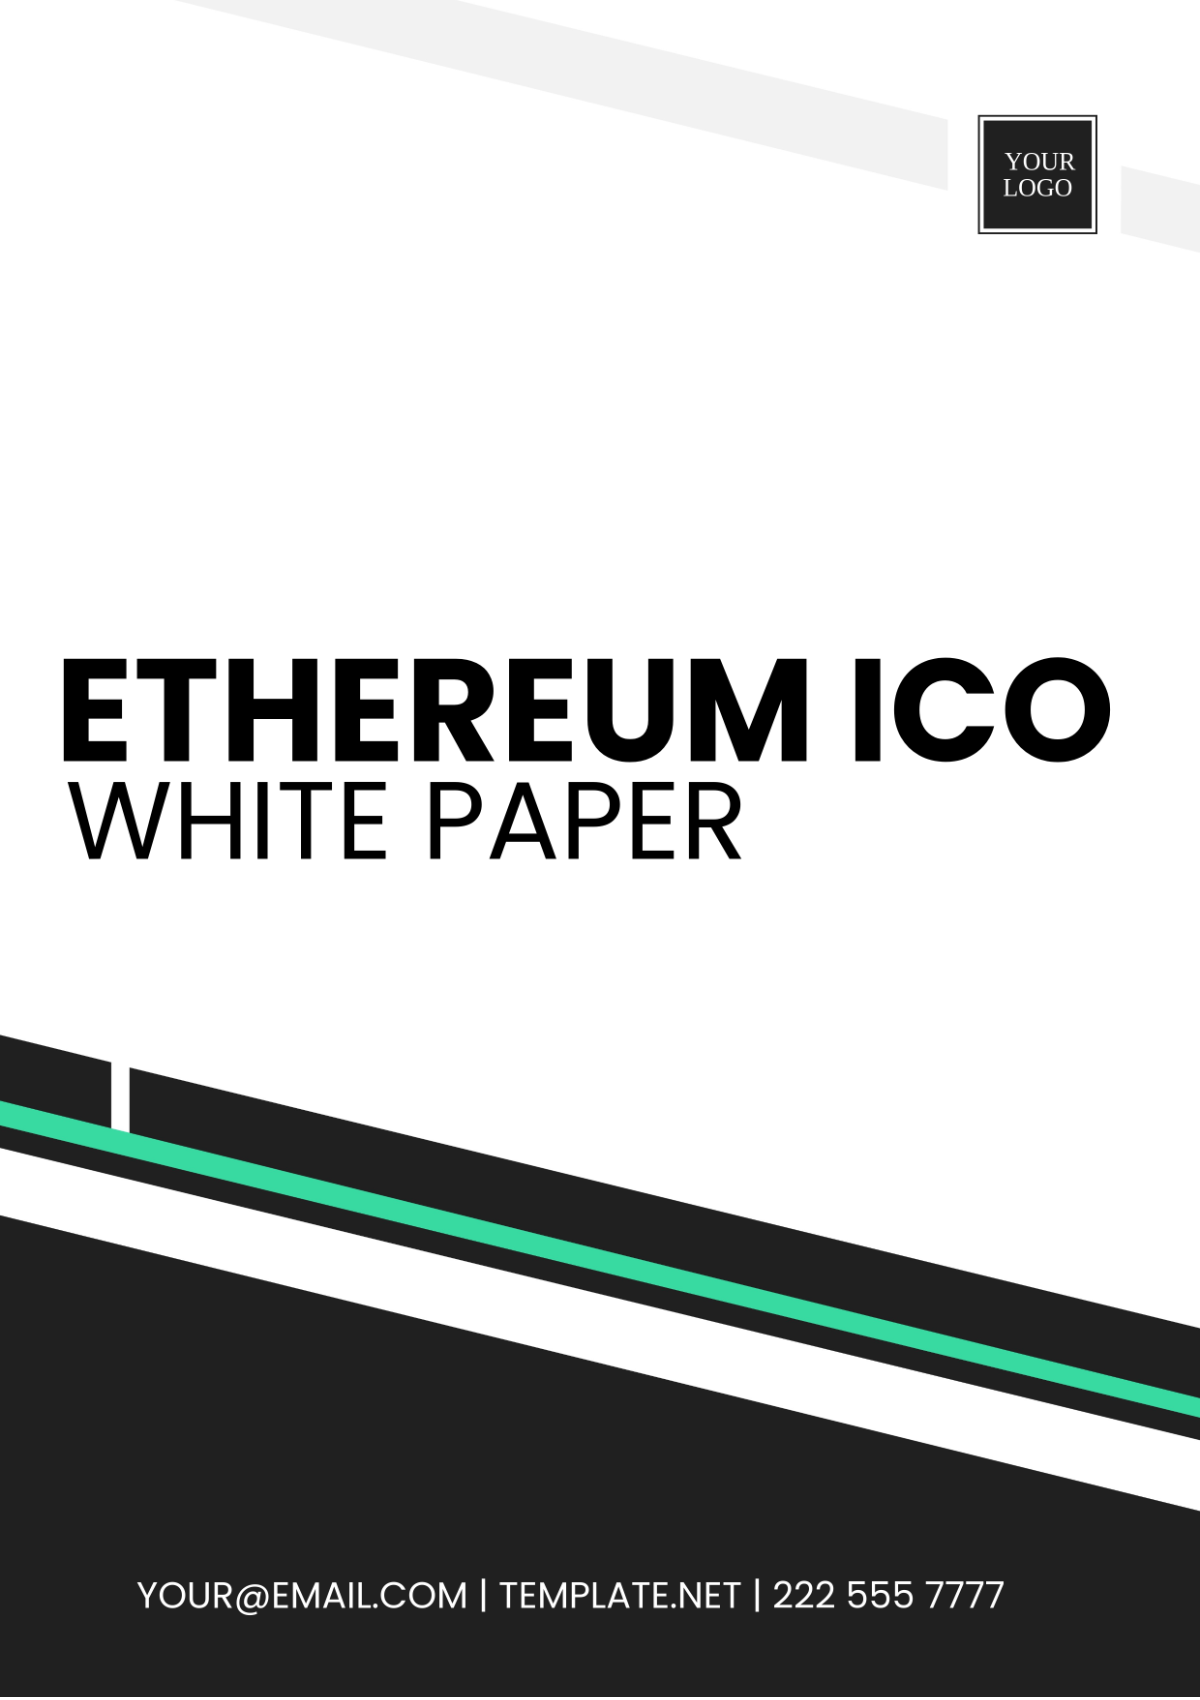 Ethereum ICO White Paper Template